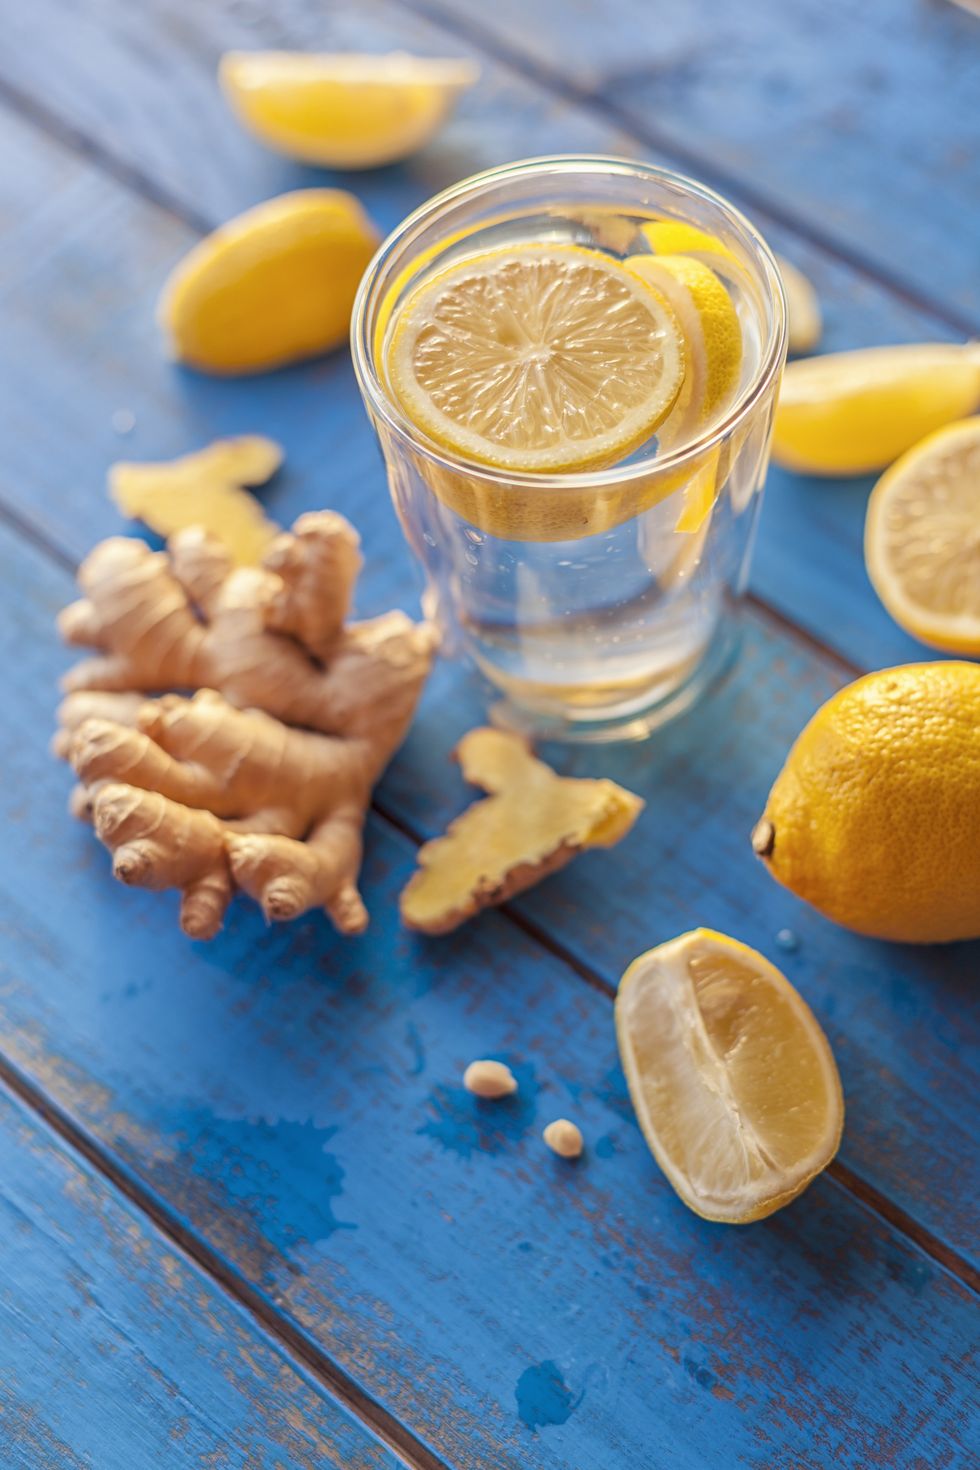 lemon and ginger root infused water